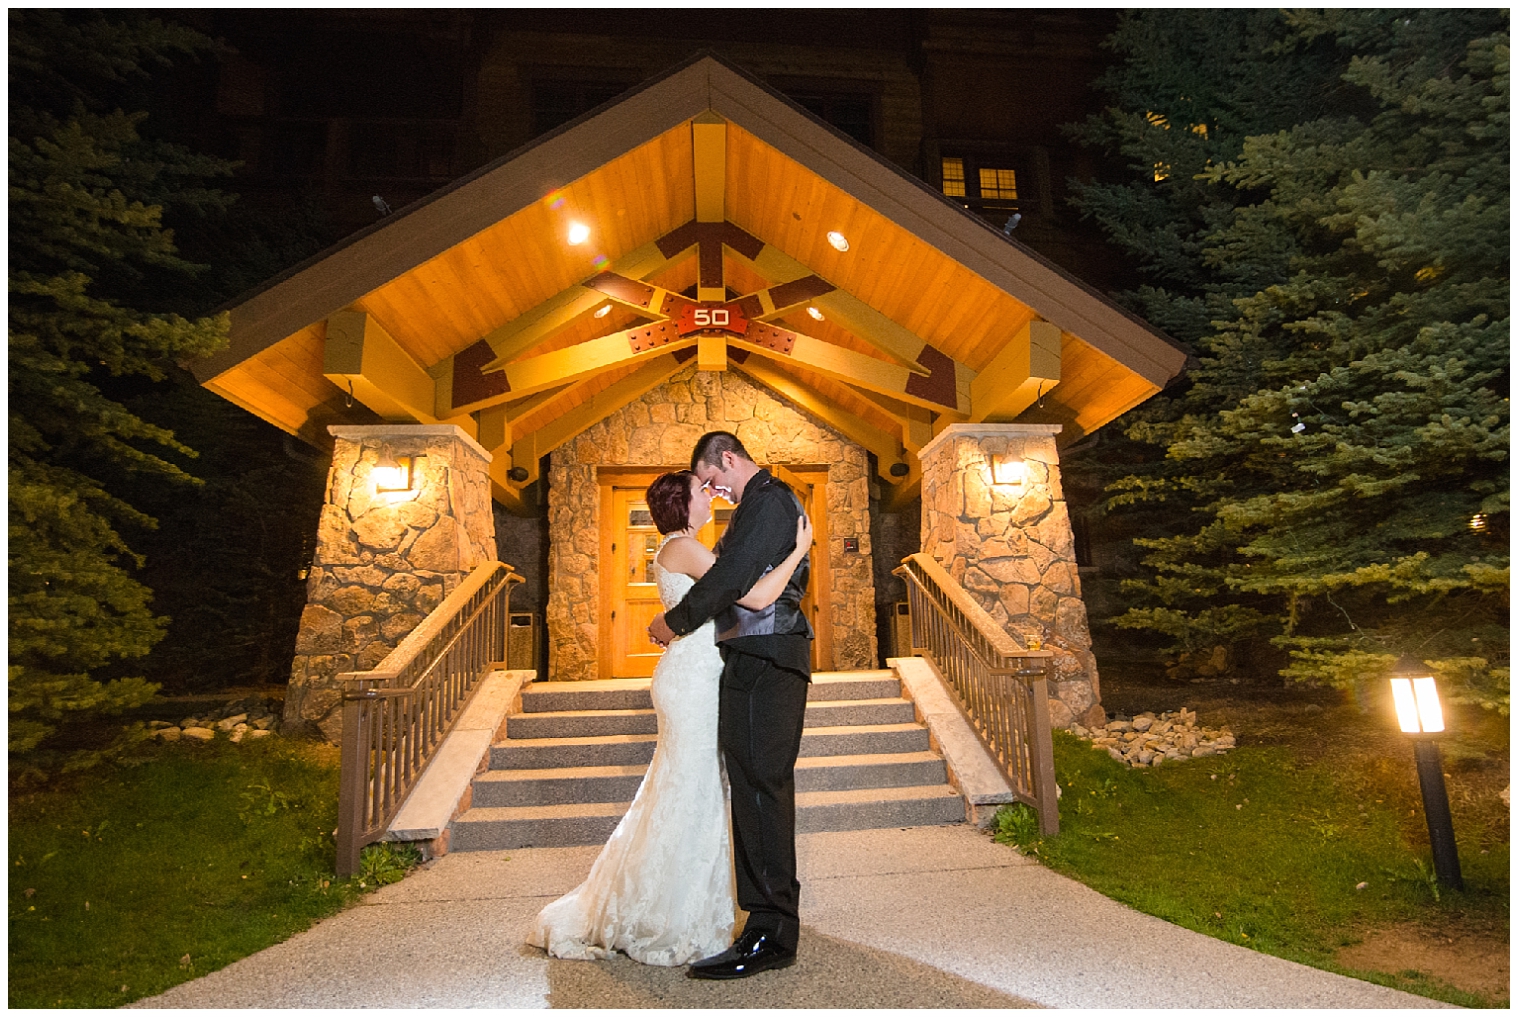 The bride and groom embrace at the end of their Breckenridge wedding night.